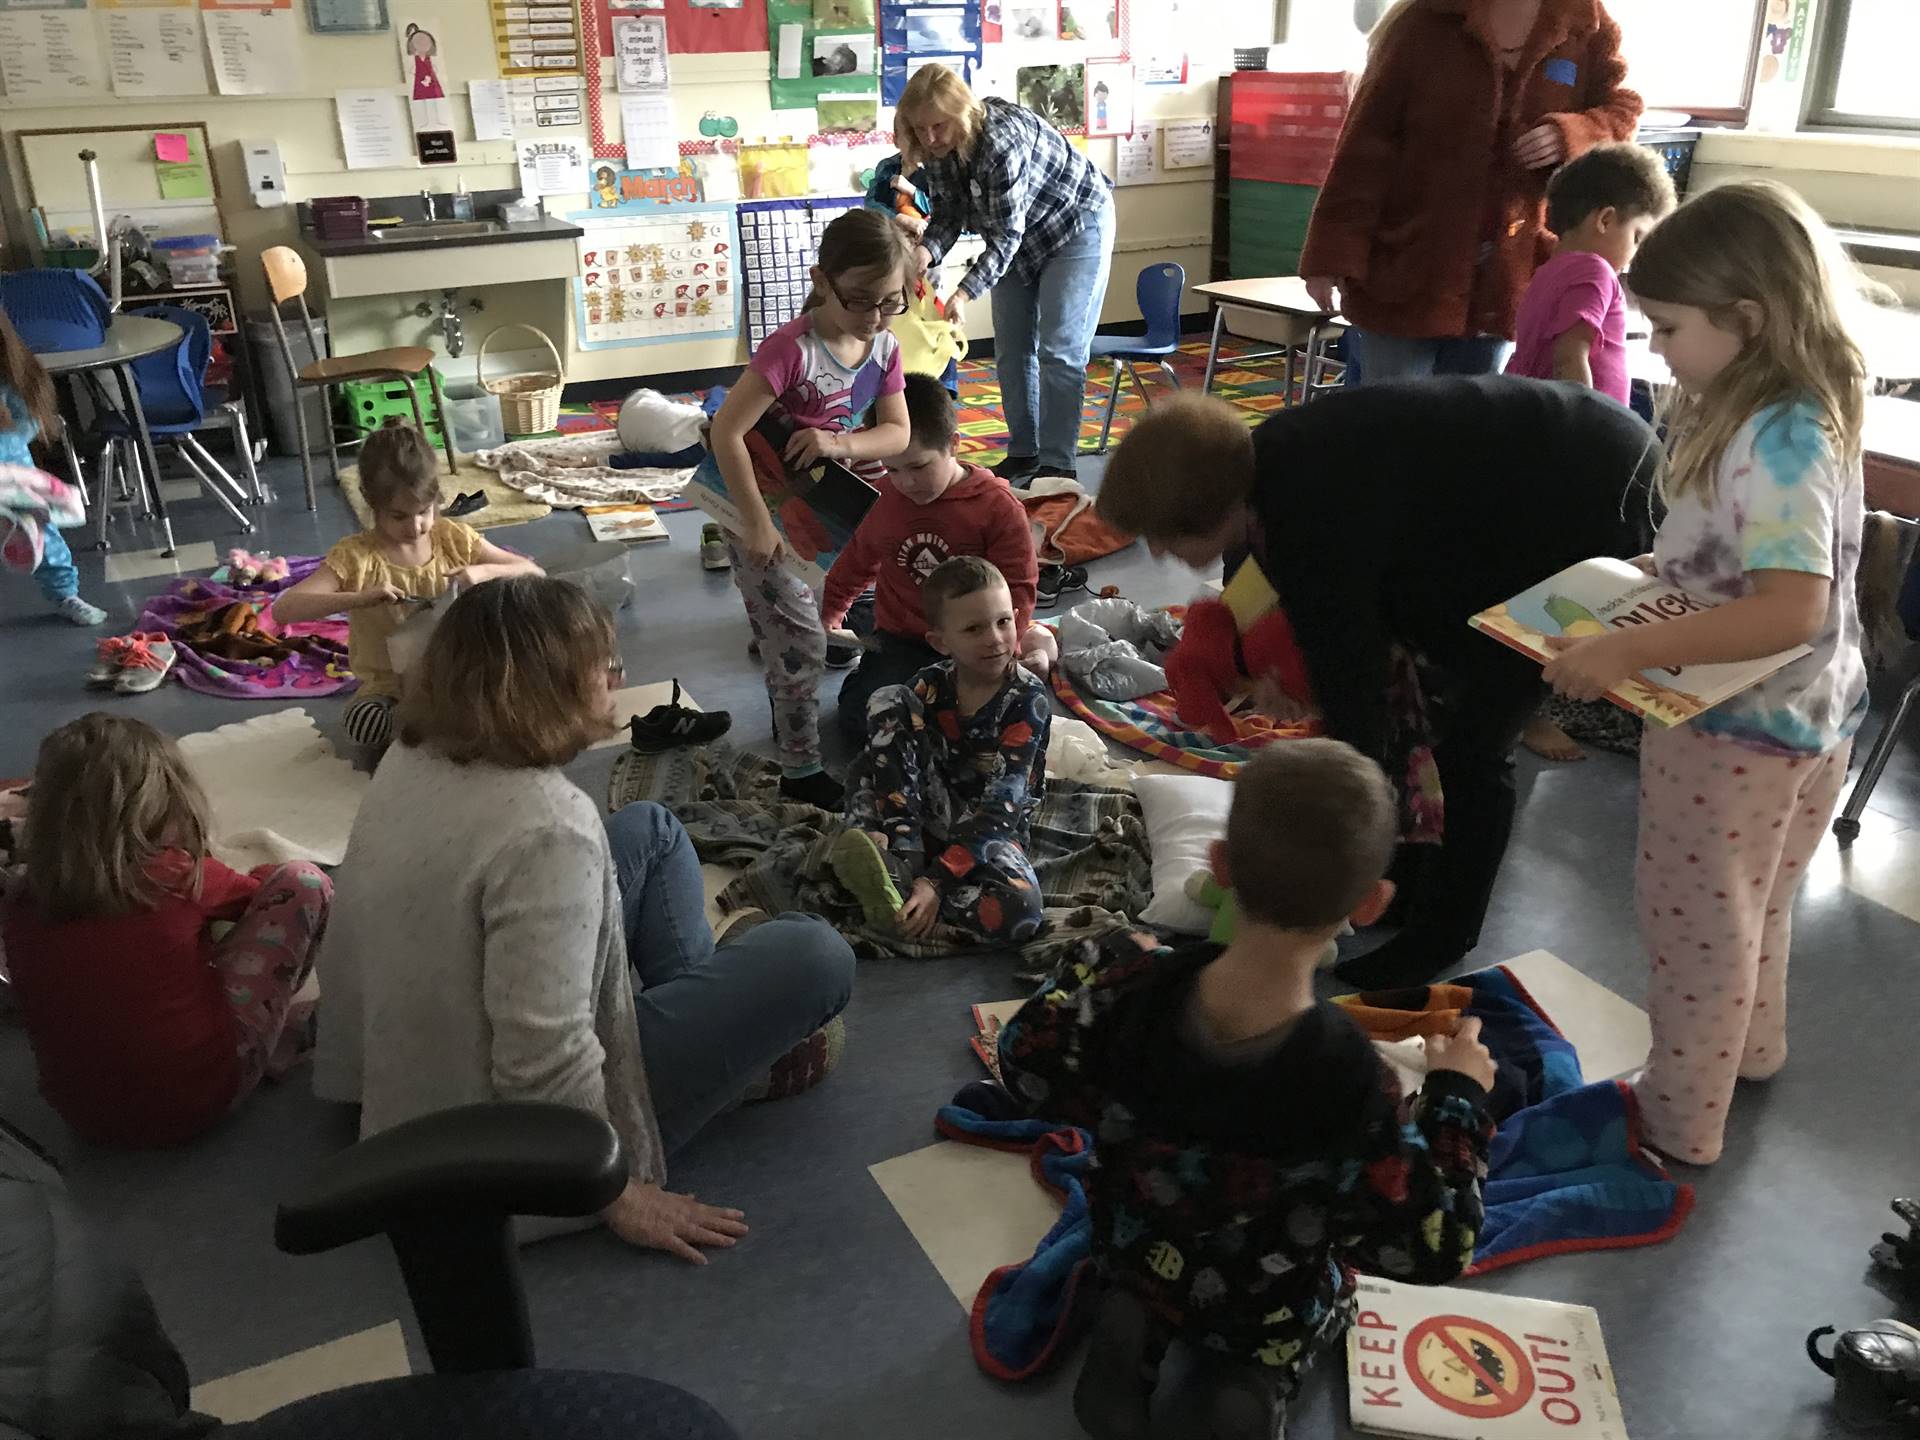 Students in Pajamas read together.